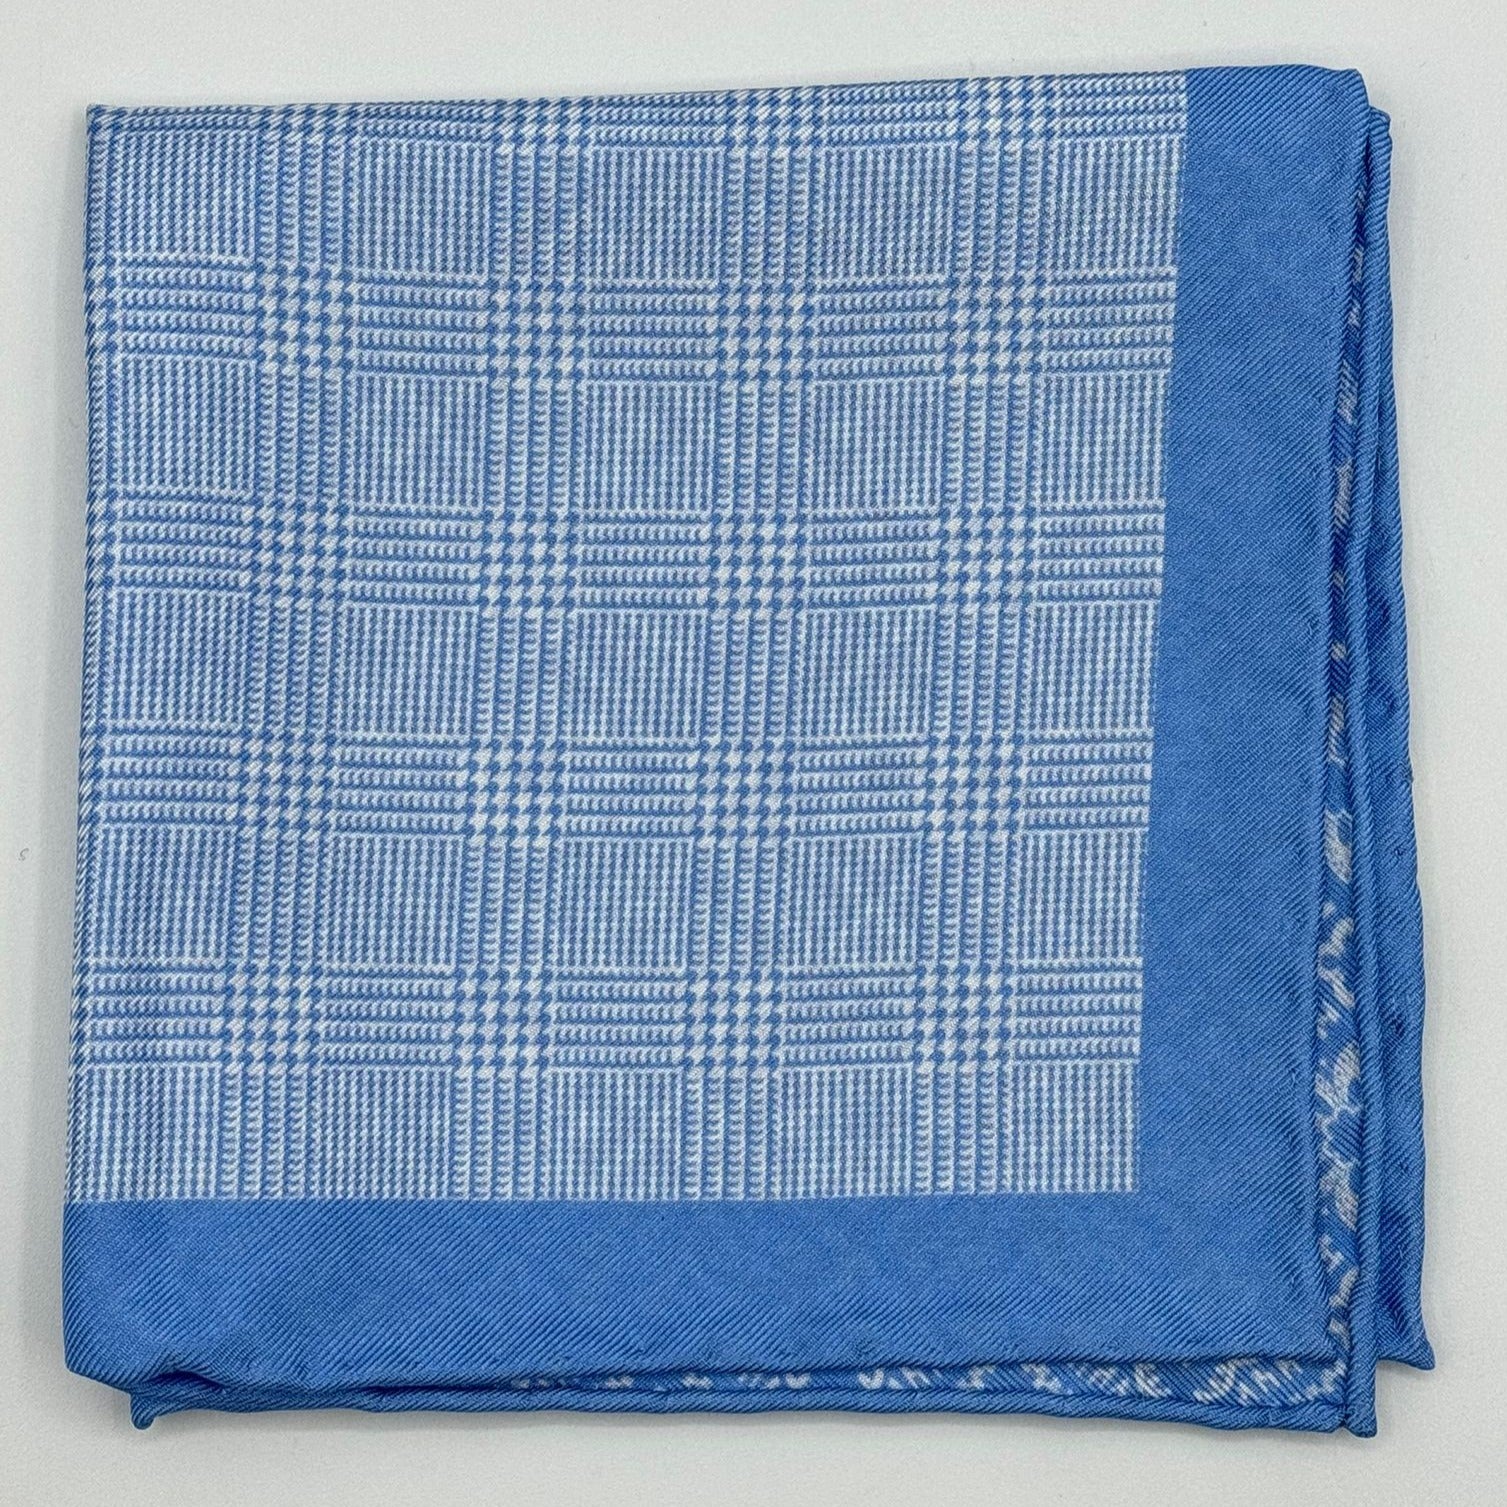 Cruciani &amp; Bella Hand-rolled&nbsp;&nbsp; 100% Silk Light Blue and White Double Faces Patterned&nbsp; Motif&nbsp; Pocket Square Made in England 33 cm X 33 cm